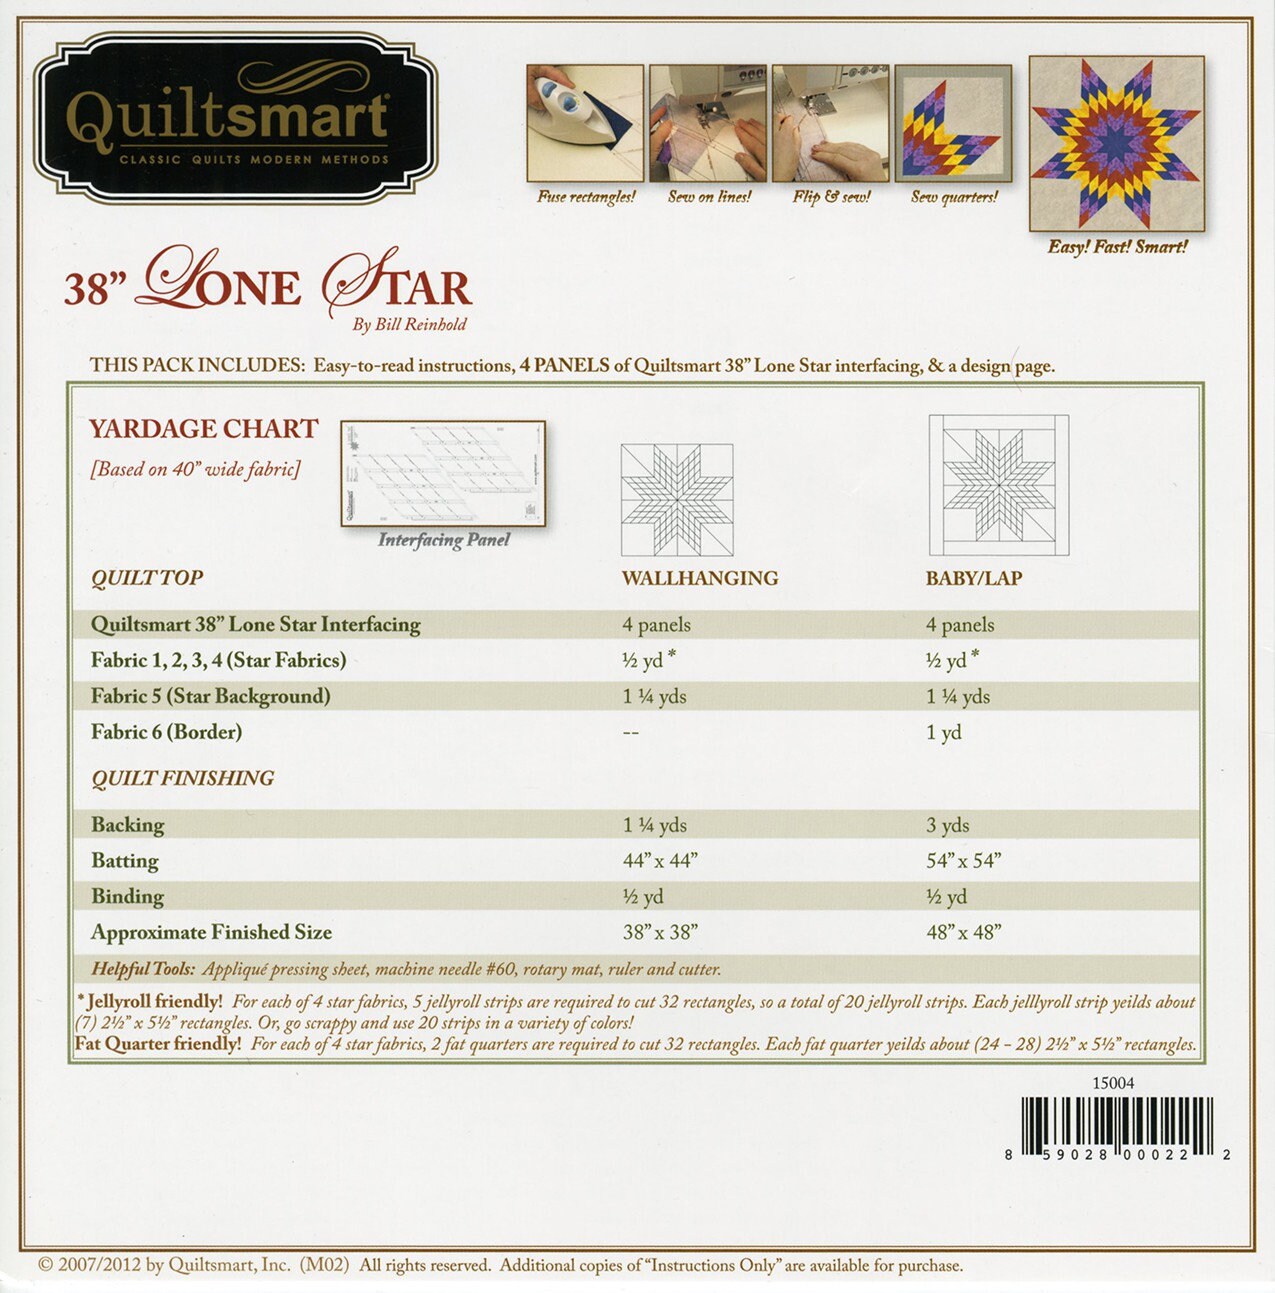 38" Lone Star Snuggler Quilt Pack, Quiltsmart QS 15004, Lone Star Printed Fusible Interfacing for Quilt